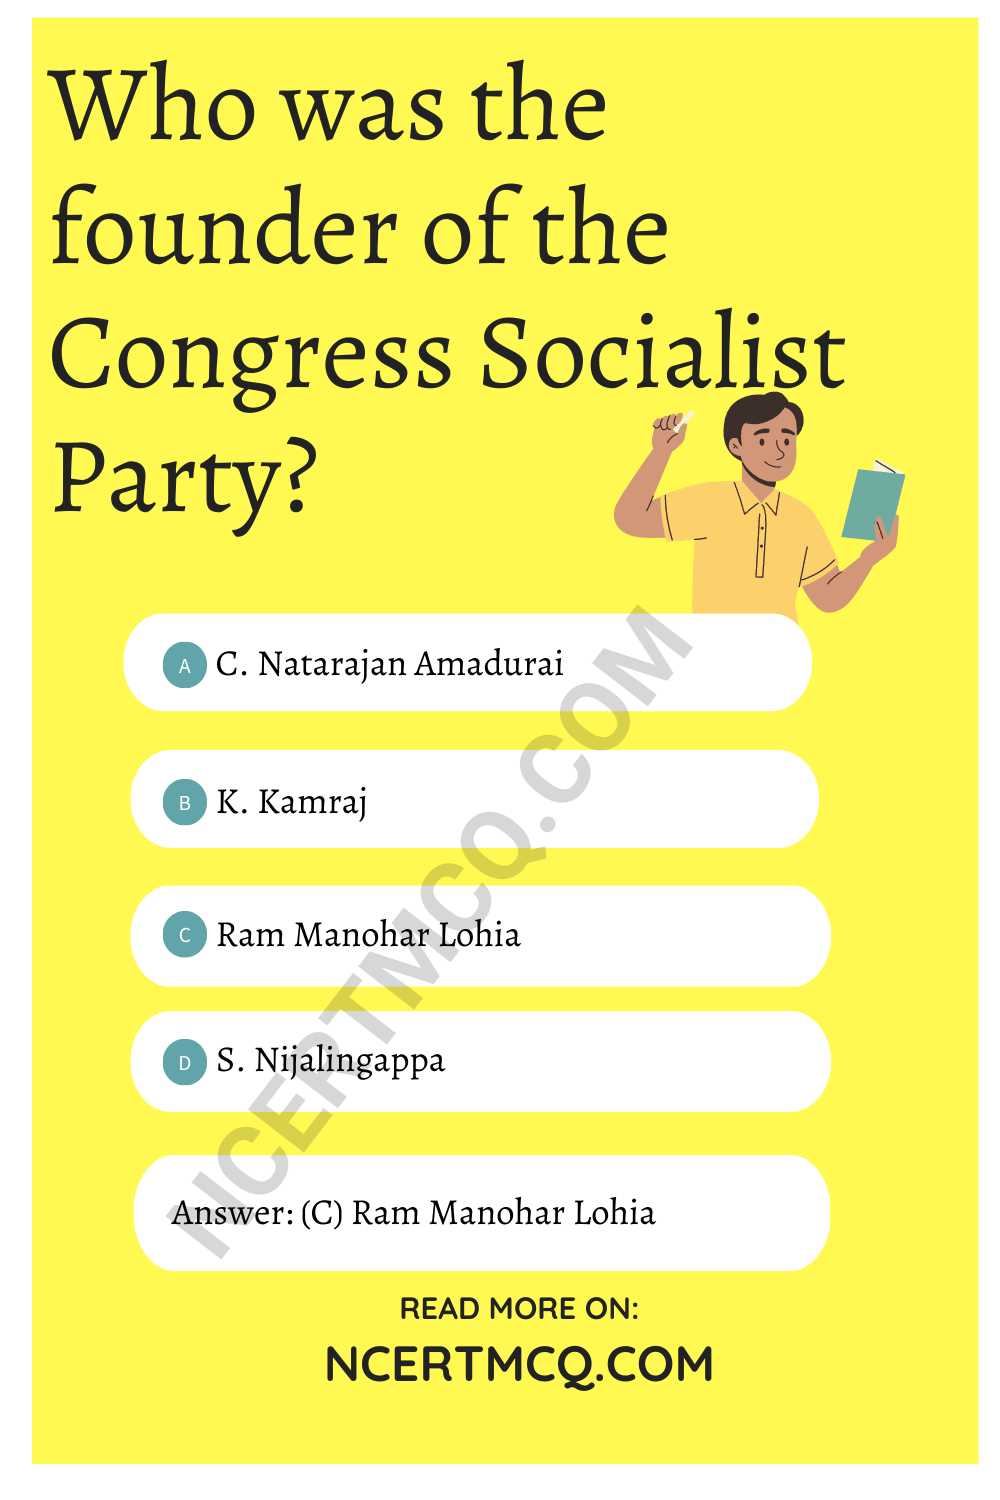 Who was the founder of the Congress Socialist Party?